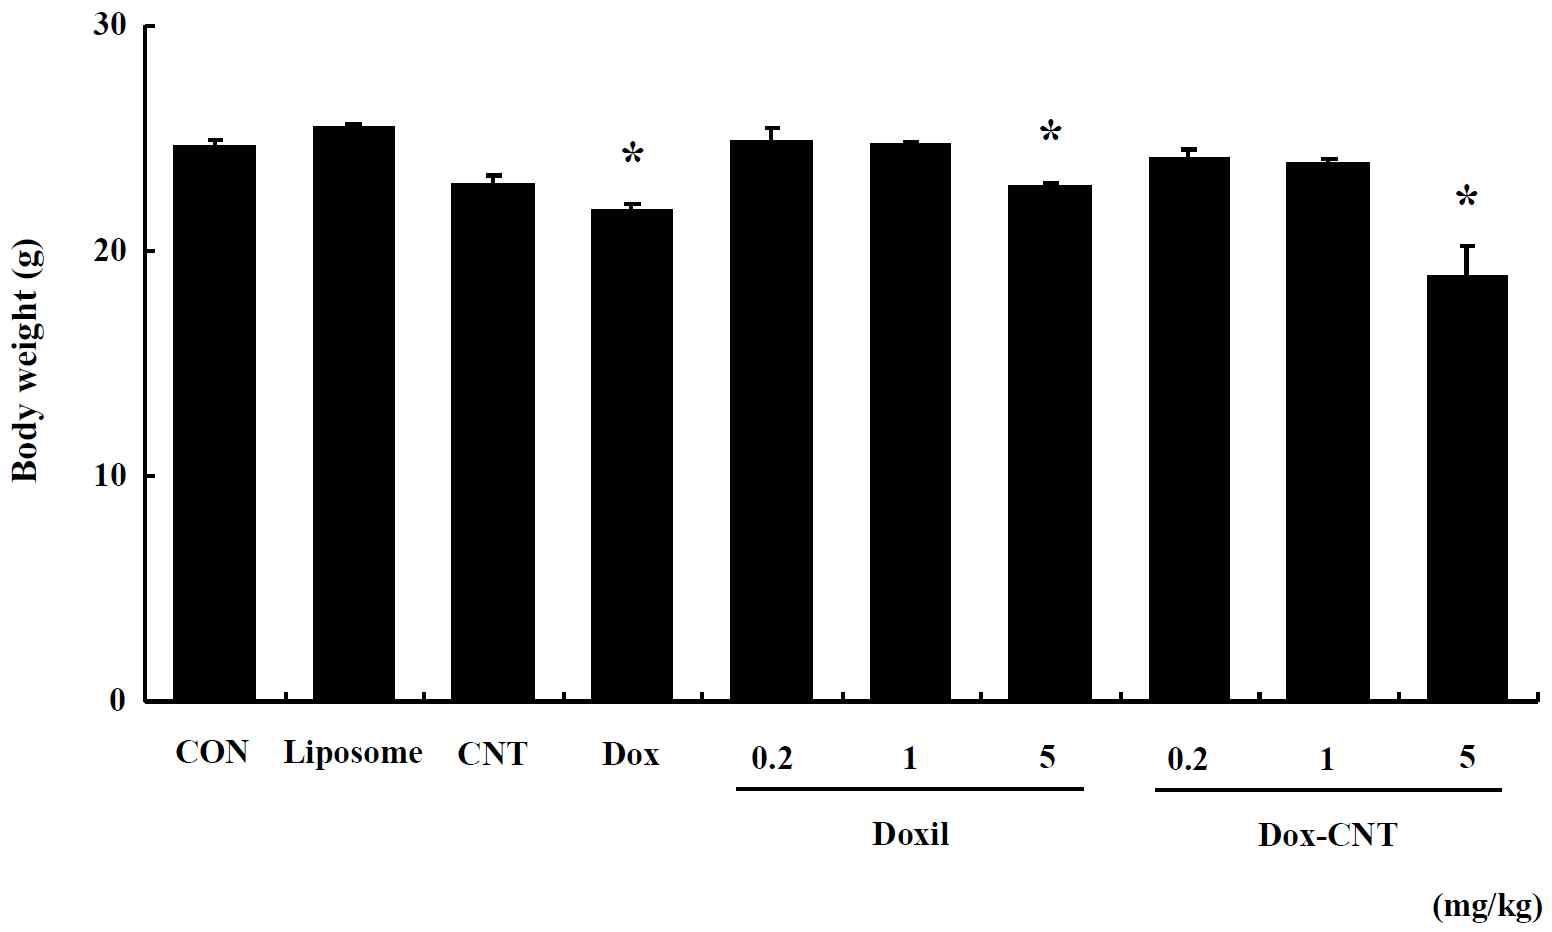 Body weight in male ICR mice for 14 days after repeated exposure. Mice were respectively administered by intravenous injection with liposome, CNT, Dox, Doxil (0.2, 1, 5 mg/kg) and Dox-CNT (0.2, 1, 5 mg/kg). The results are presented as mean ± SE (n = 10). * p < 0.05, significantly different from the control.